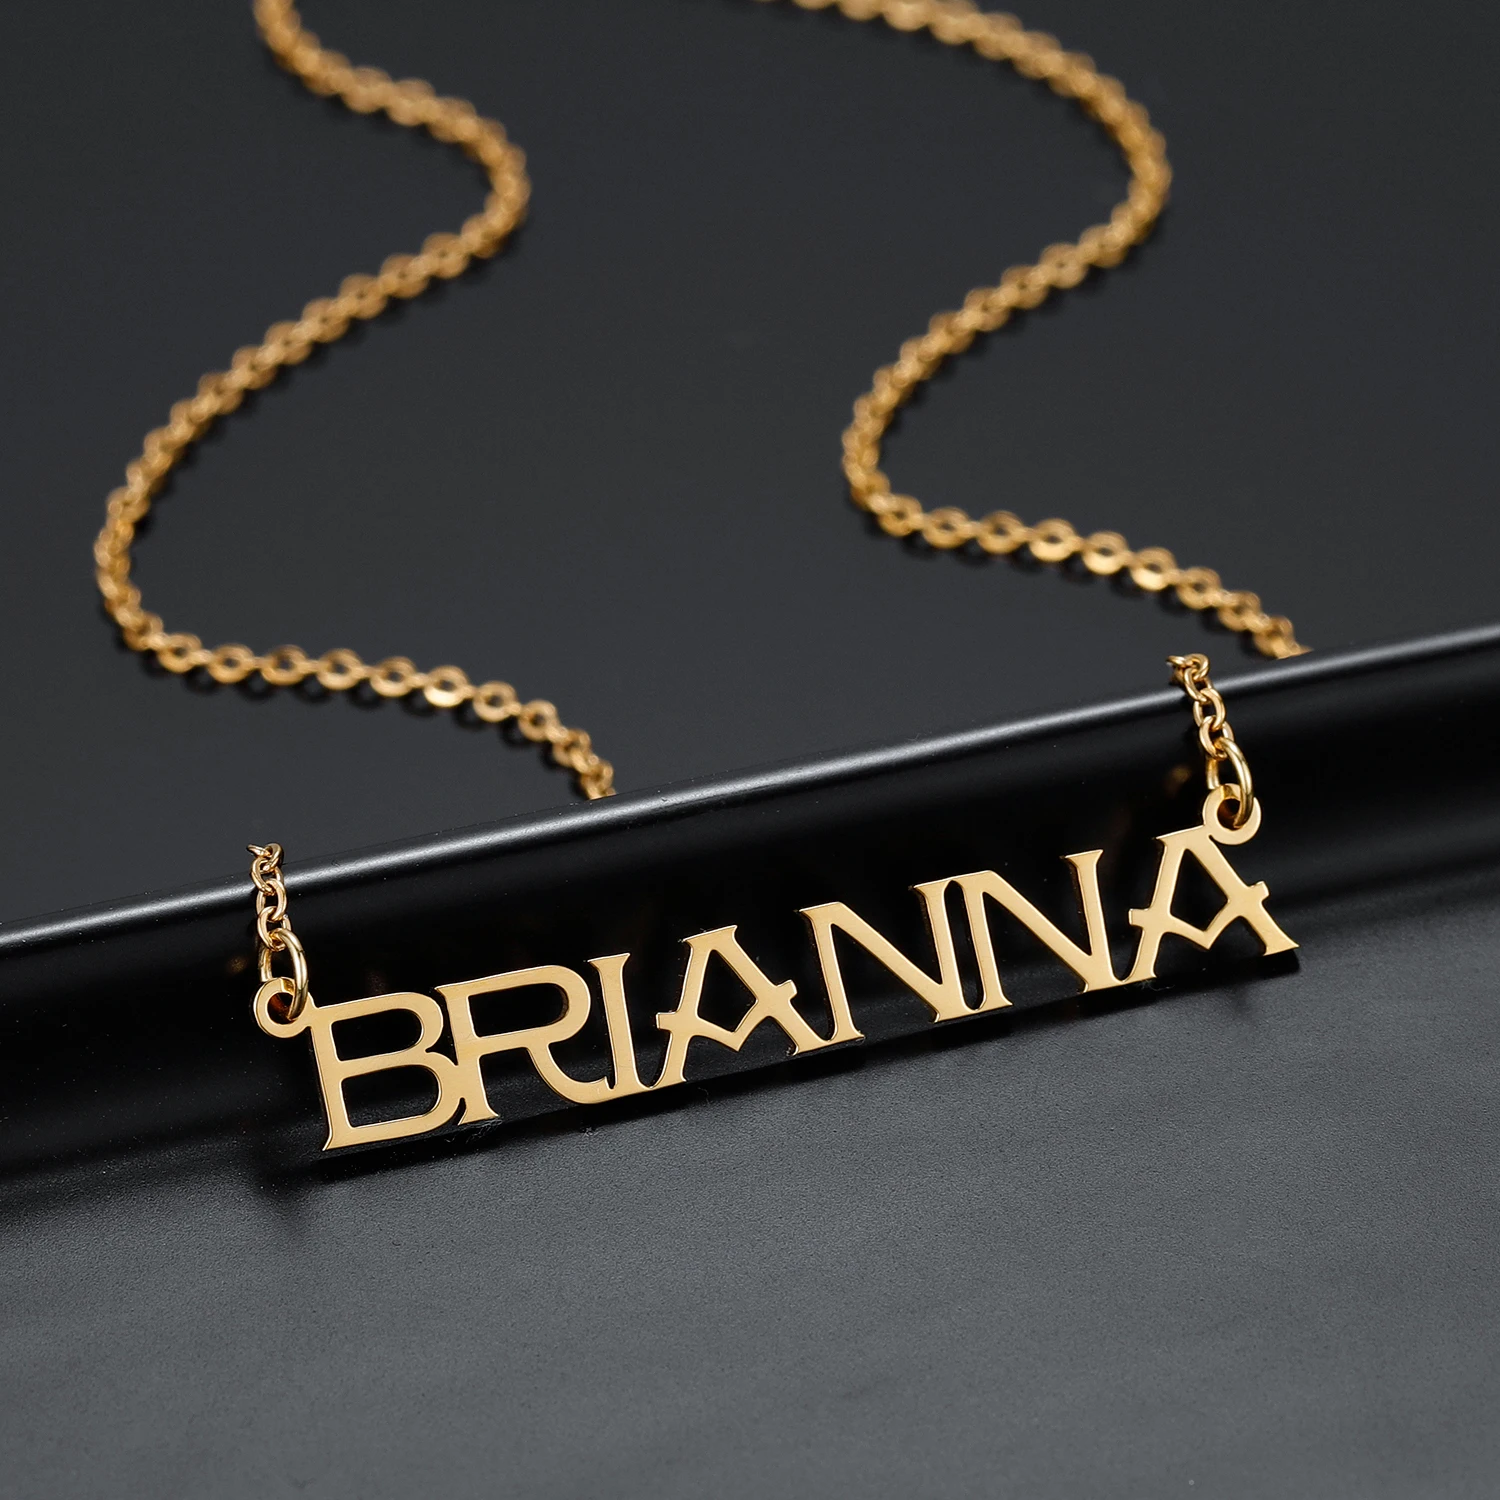 

Dascusto Custom Stainless Steel Name Necklace Pendant Personalized Jewelry 18K Gold Plated Nameplate Necklaces For Women Gifts